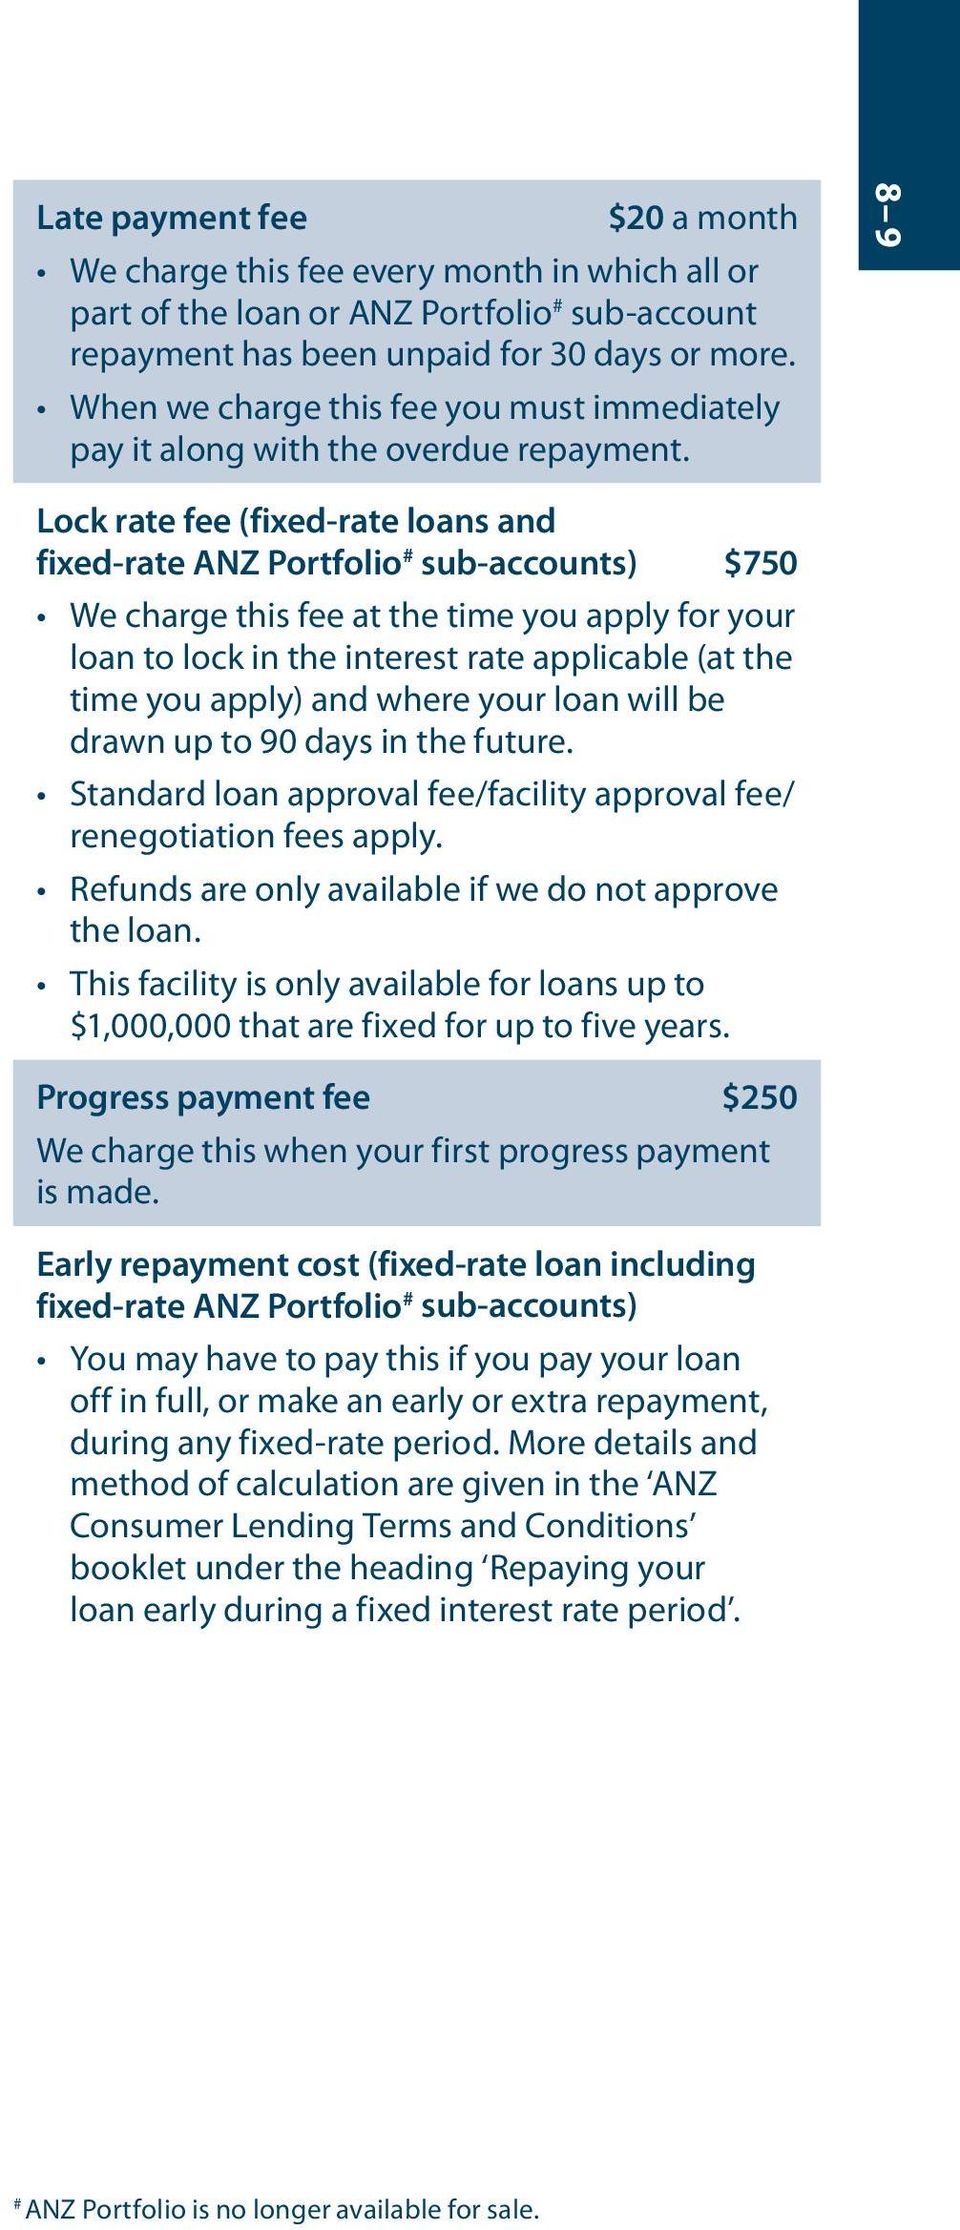 8 9 Lock rate fee (fixed-rate loans and fixed-rate ANZ Portfolio # sub-accounts) $750 We charge this fee at the time you apply for your loan to lock in the interest rate applicable (at the time you